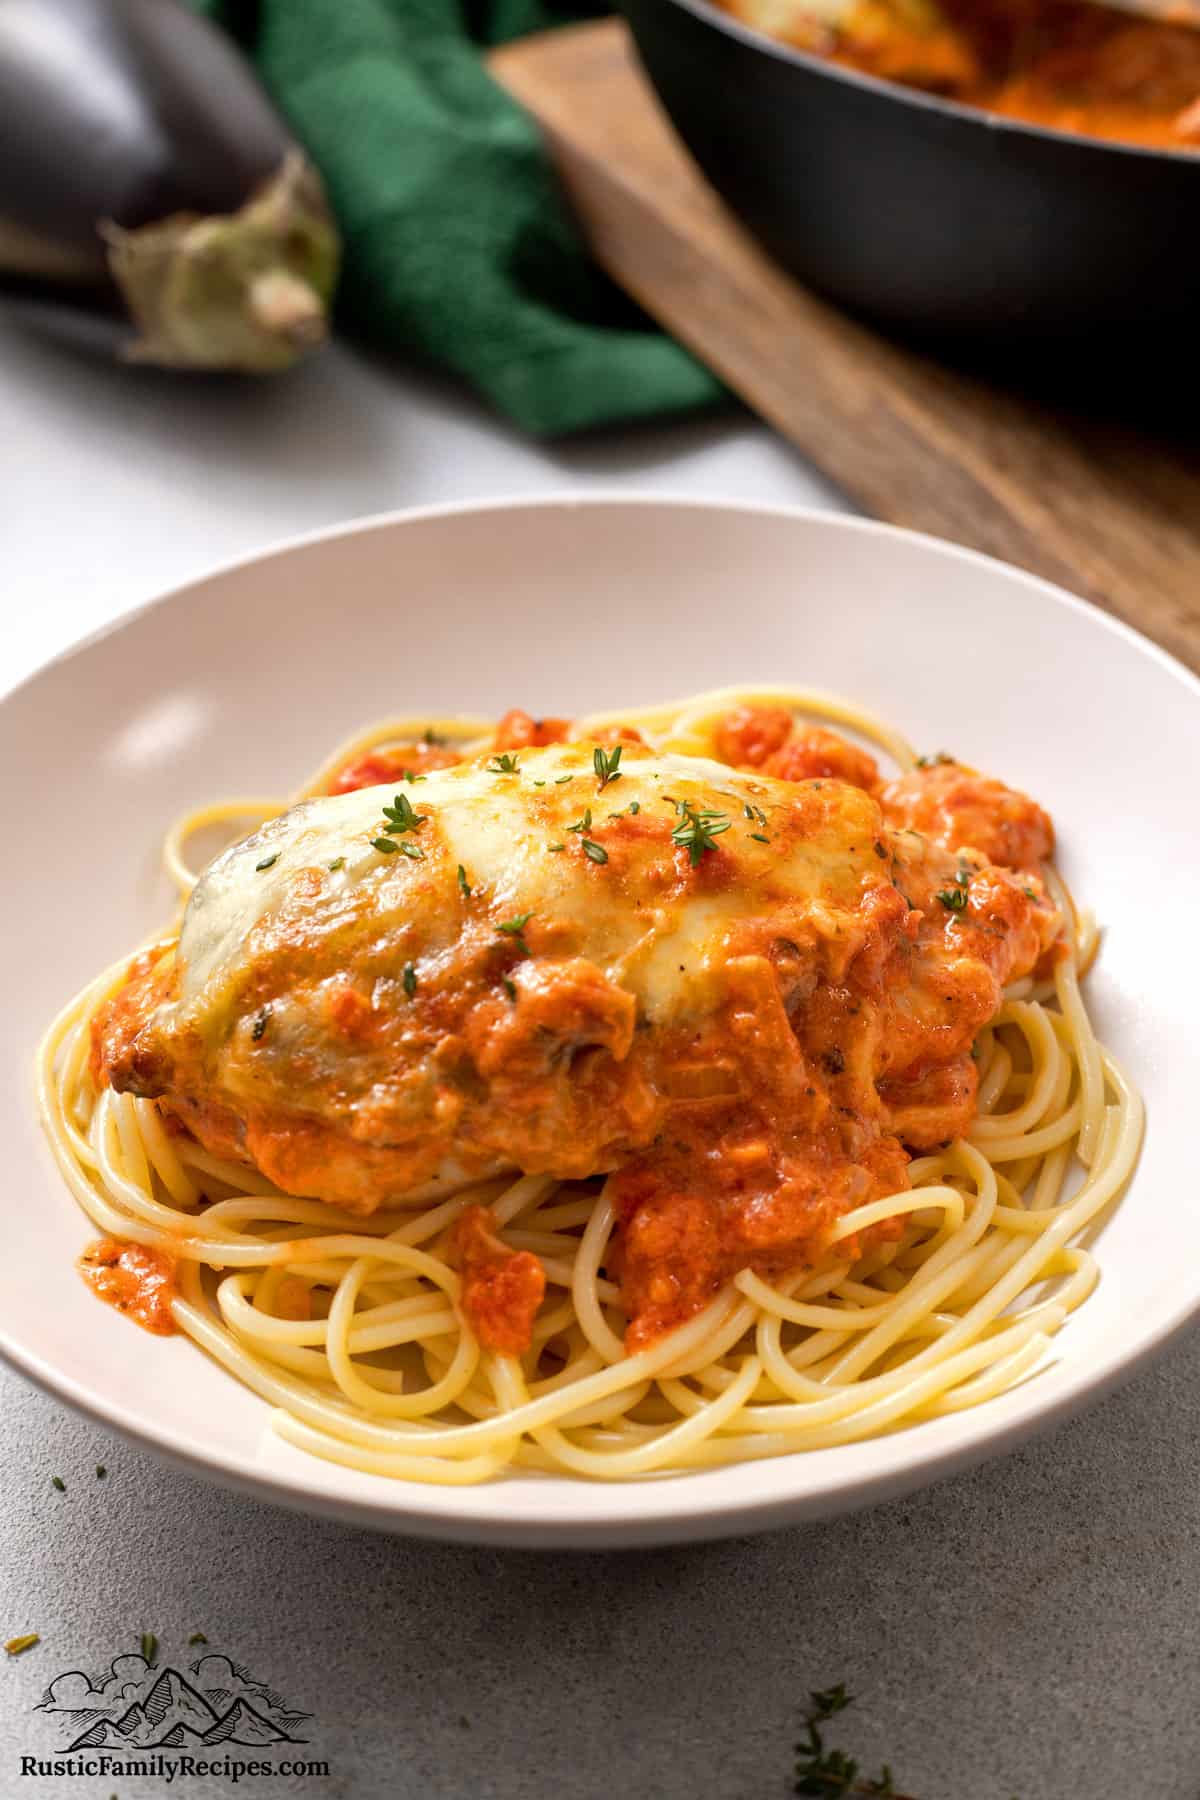 Chicken Sorrentino is served on a bed of spaghetti